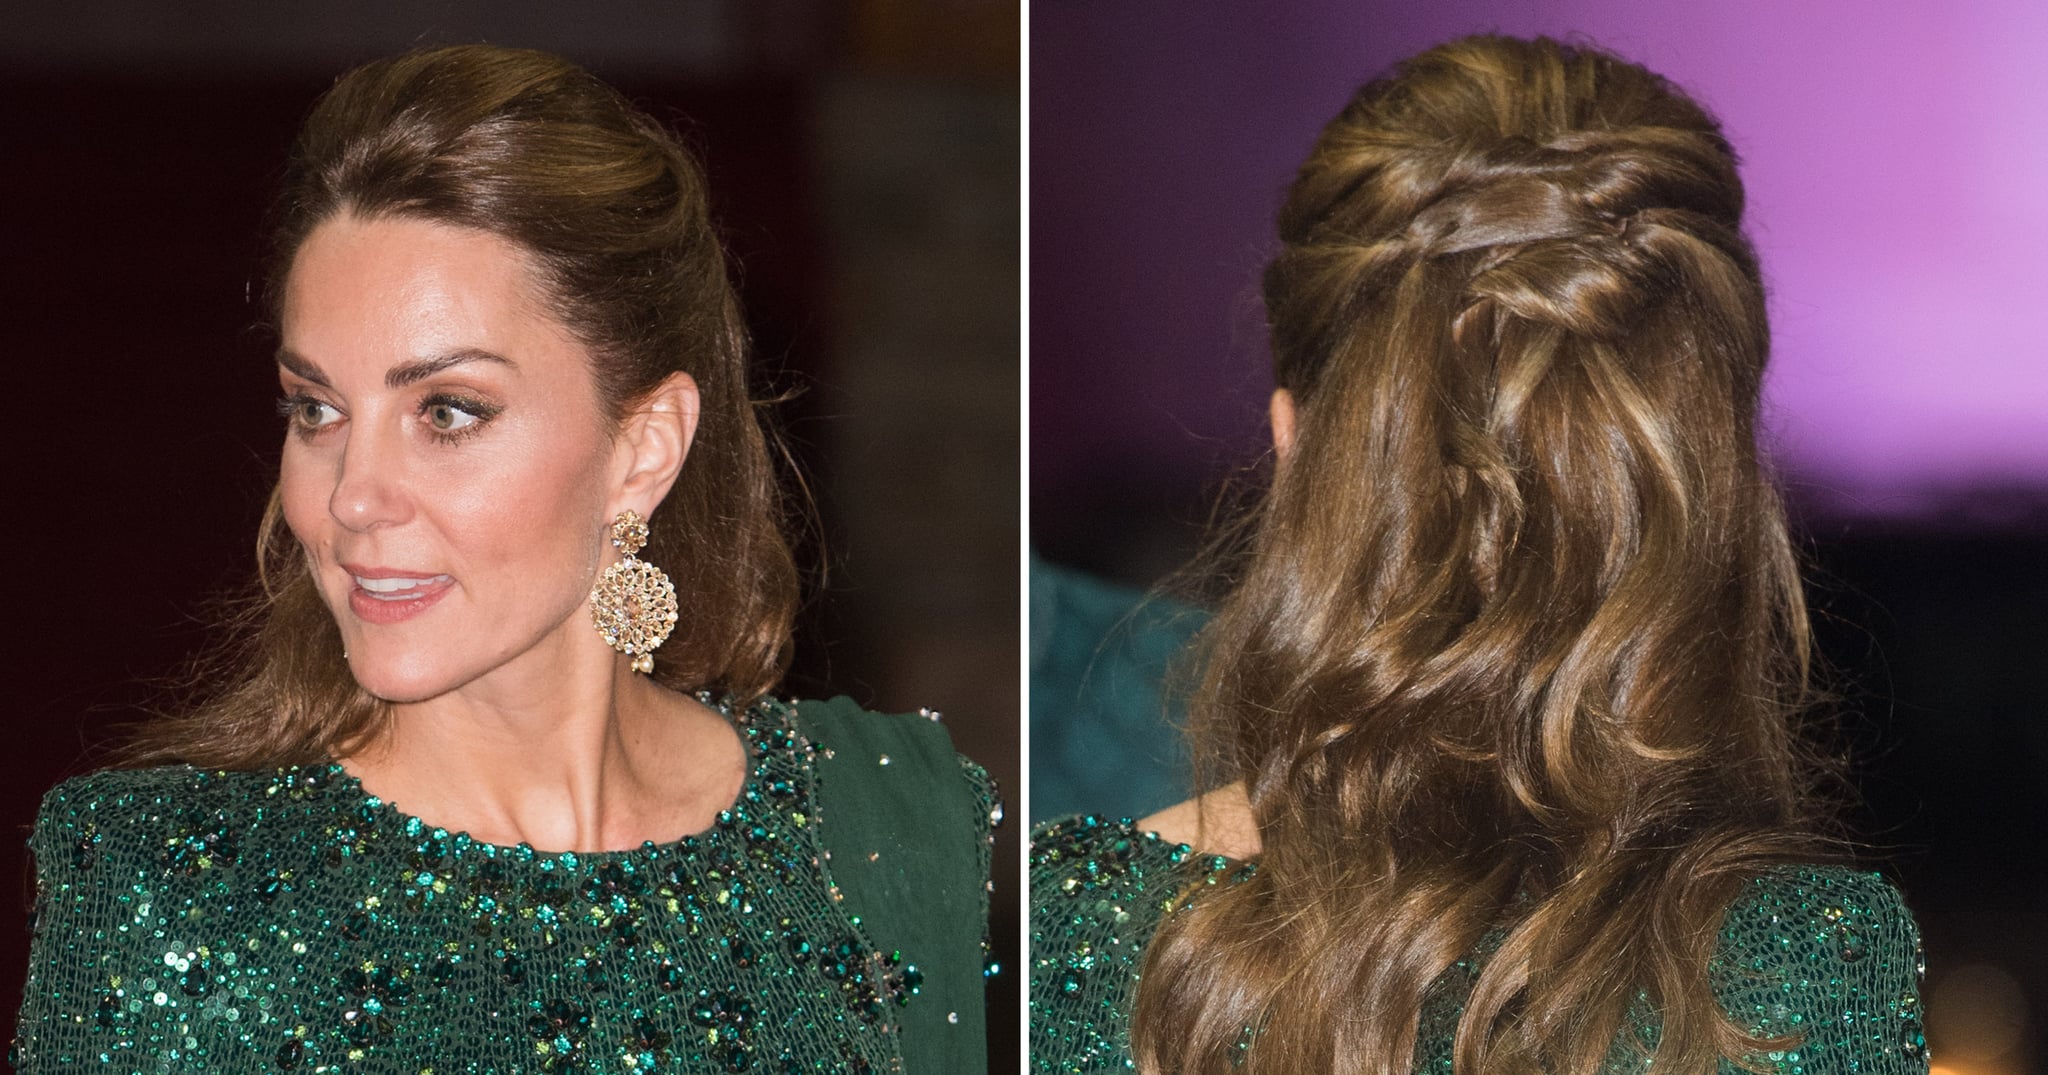 Kate Middleton wore an intricate updo for St Patricks Day